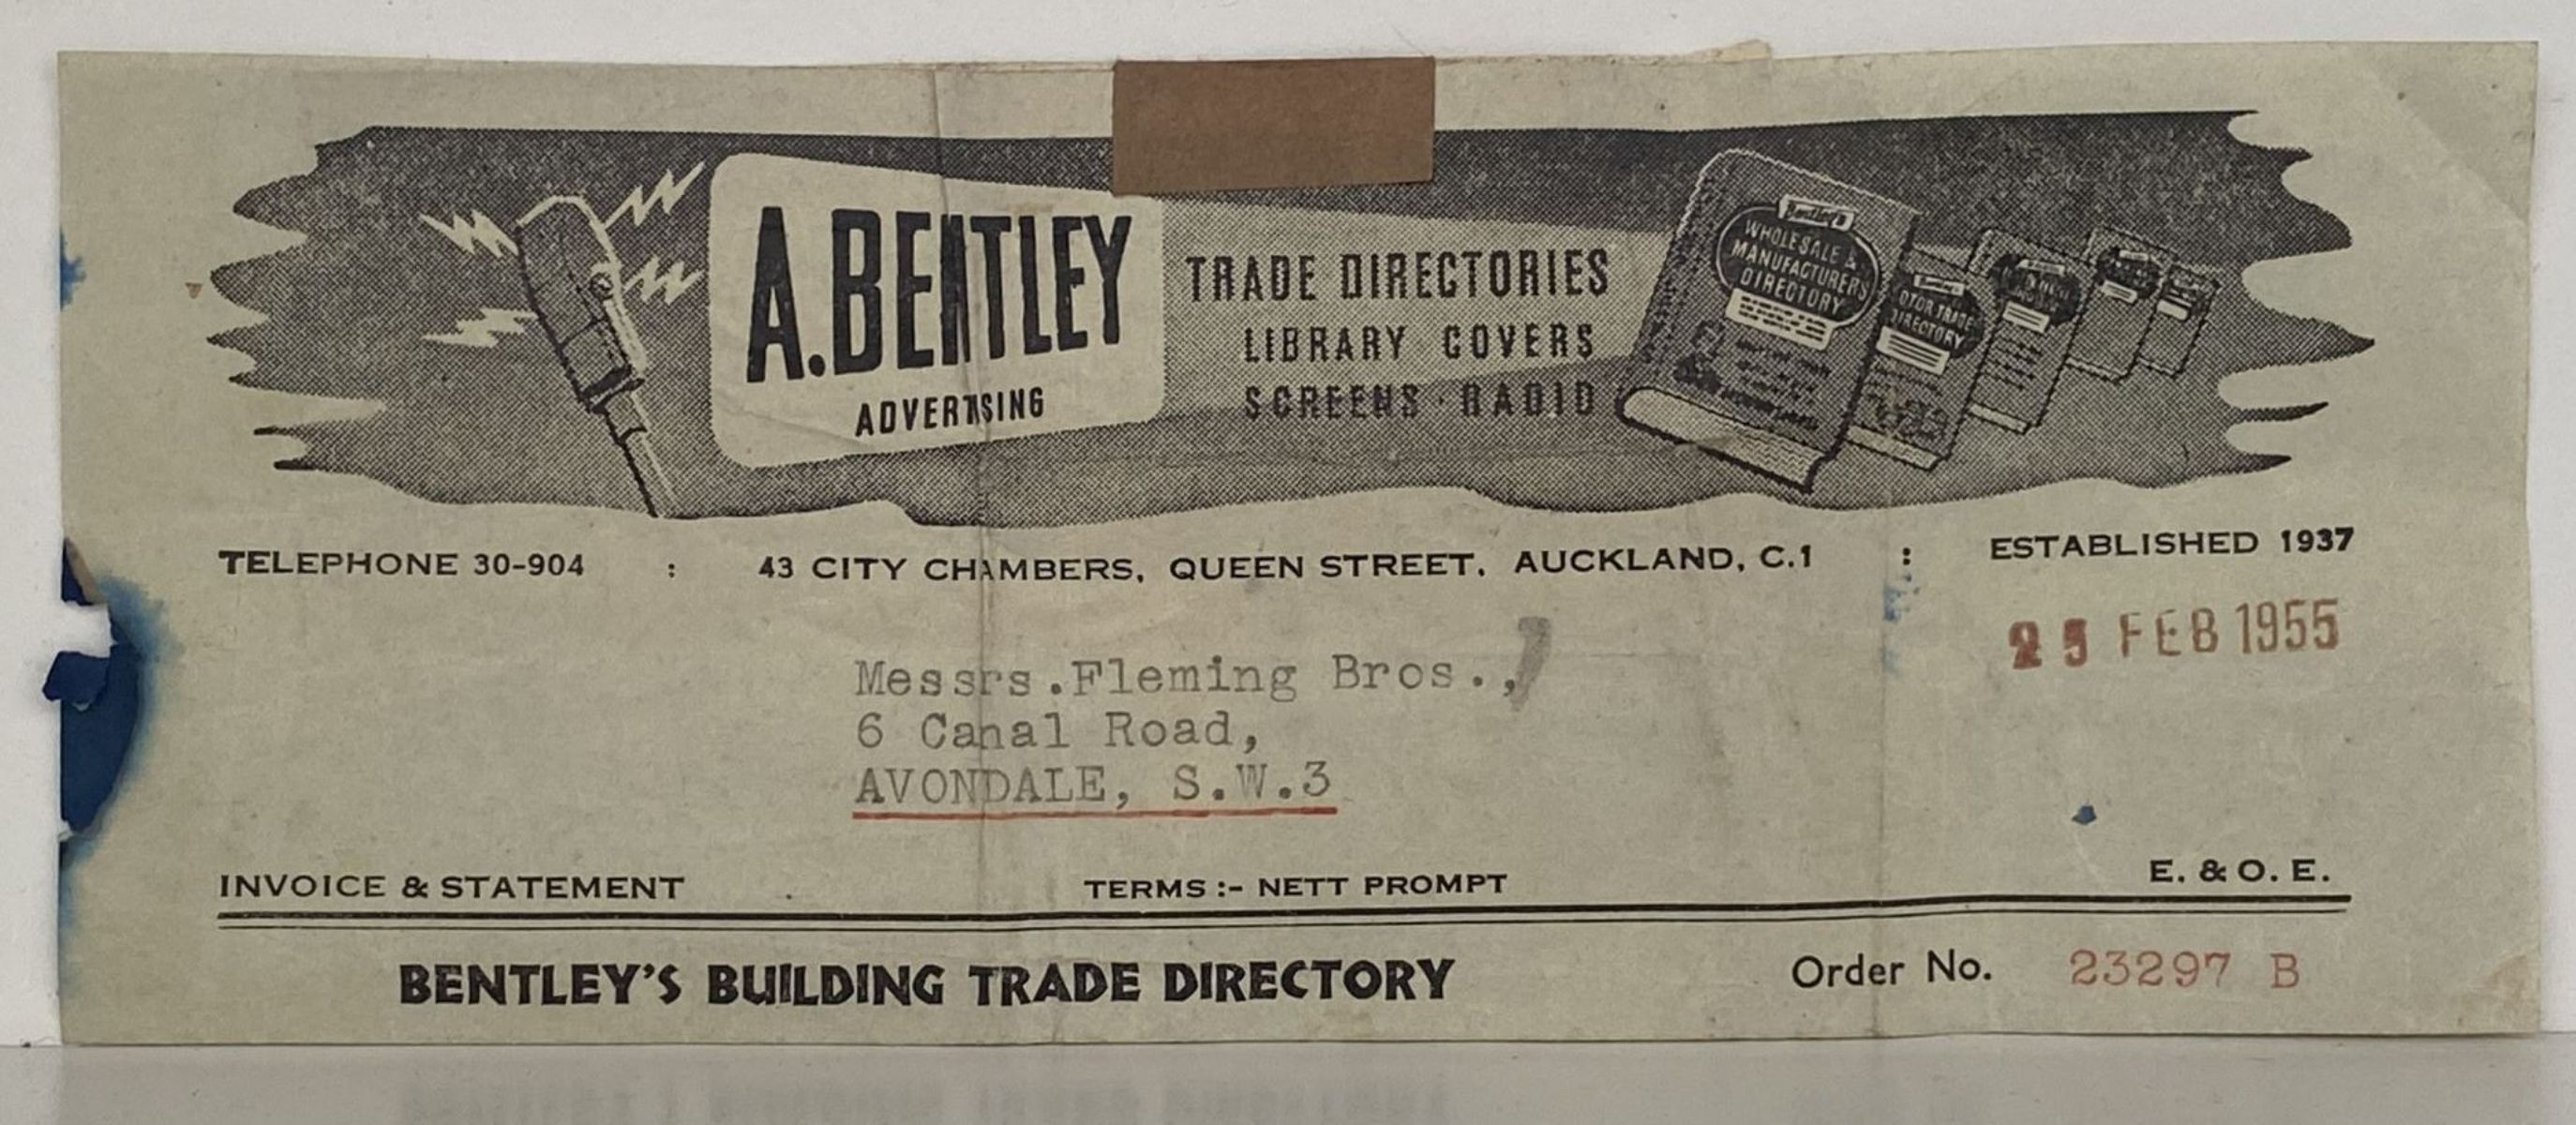 OLD INVOICE / RECEIPT: from A. Bentley Trade Directories 1955